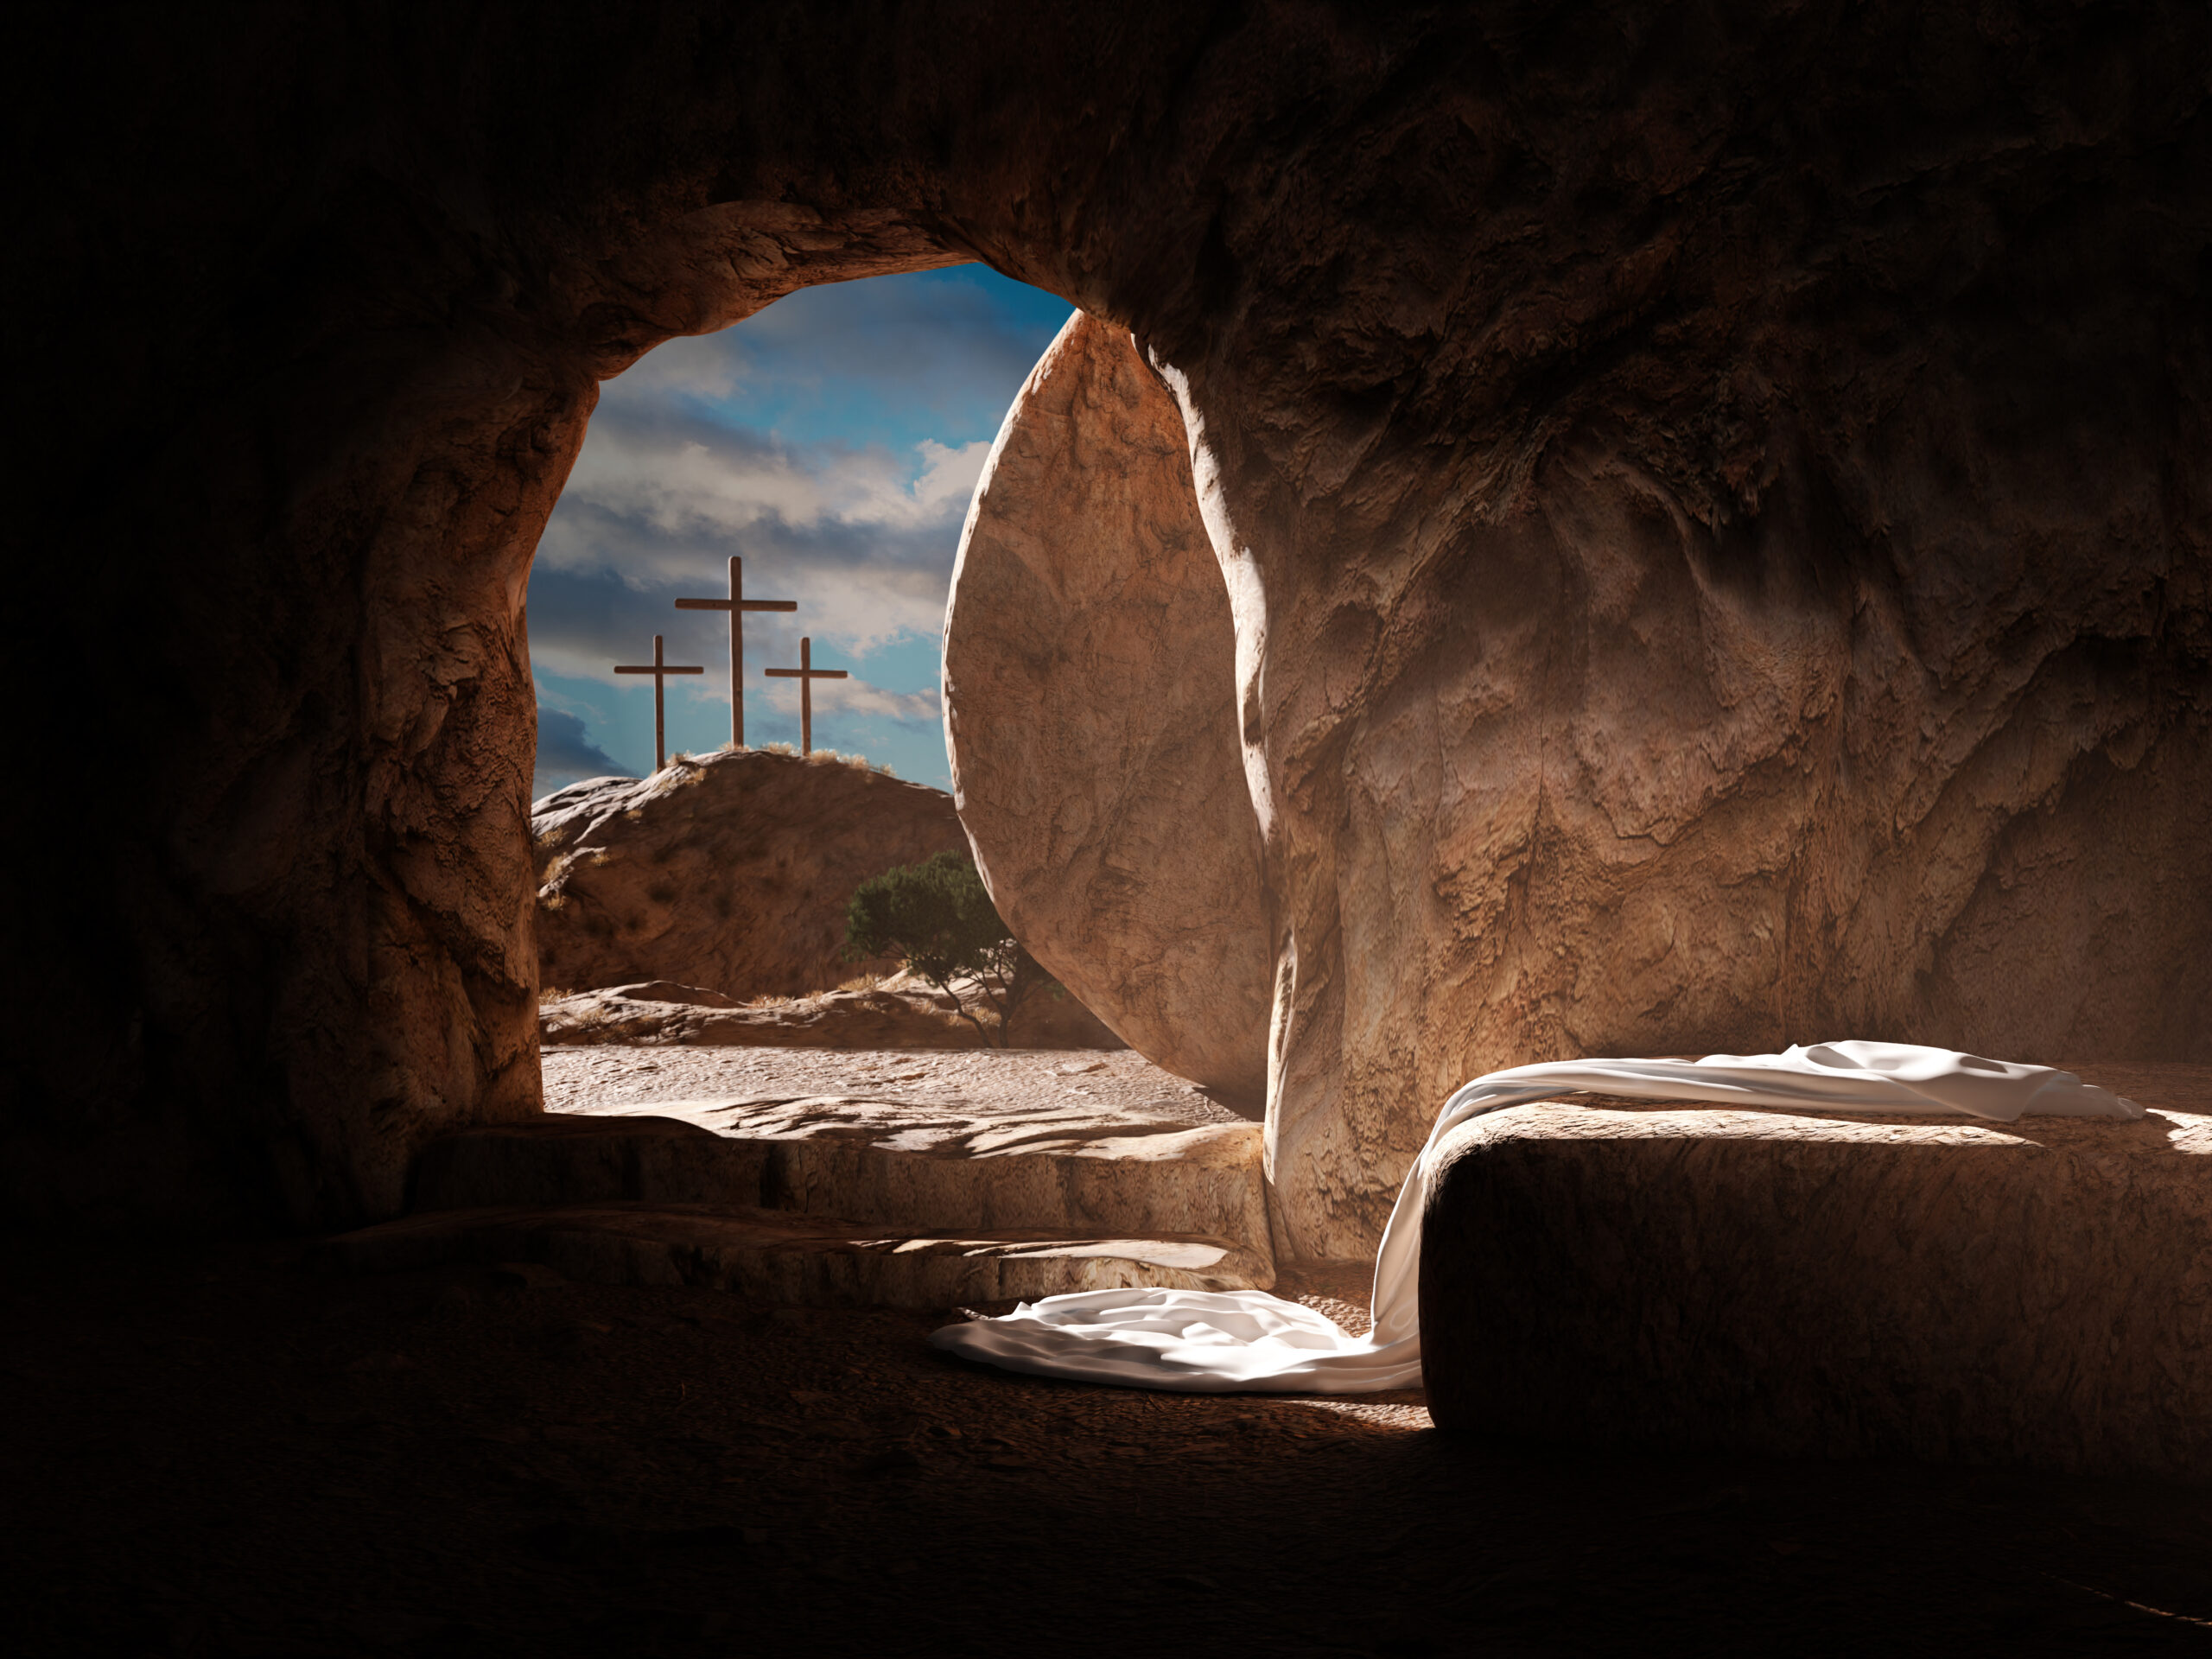 A stone cave with a rounded entrance shows a large rock moved aside. Sunlight illuminates an empty stone slab draped with a white cloth. Three wooden crosses are visible on a hill outside the cave against a cloudy sky.